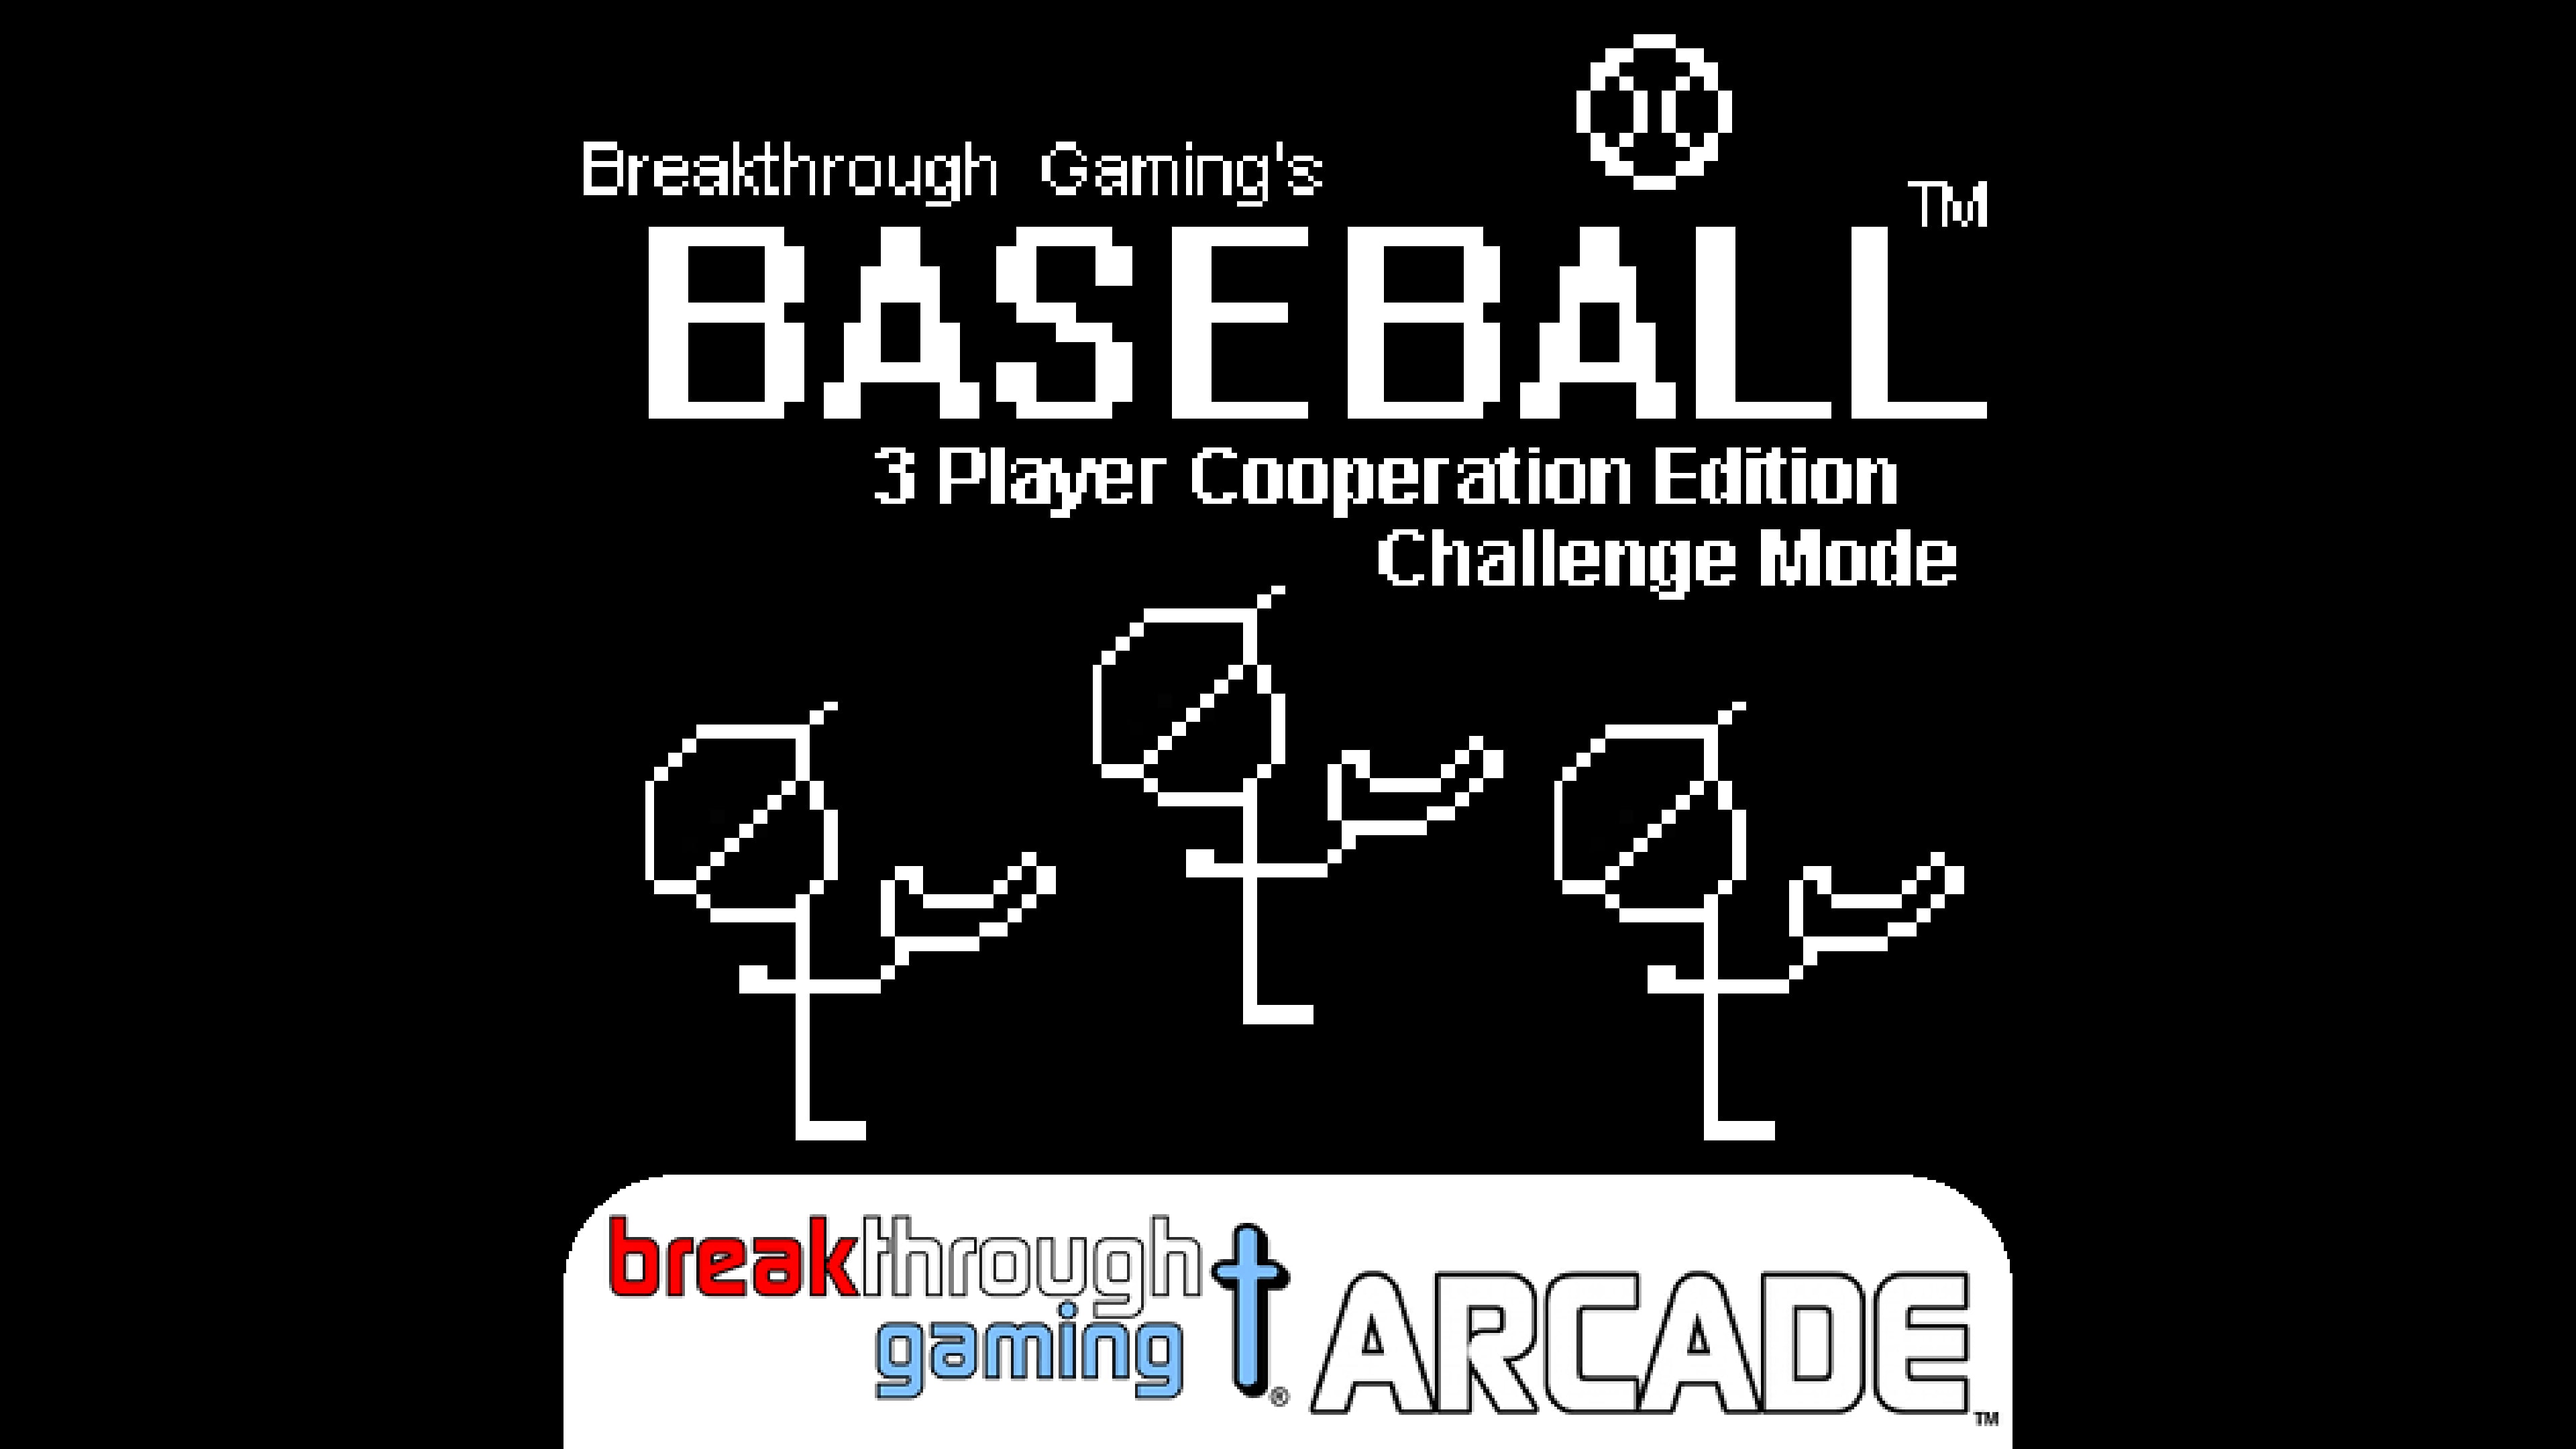 Baseball (3 Player Cooperation Edition) (Challenge Mode) - Breakthrough Gaming Arcade